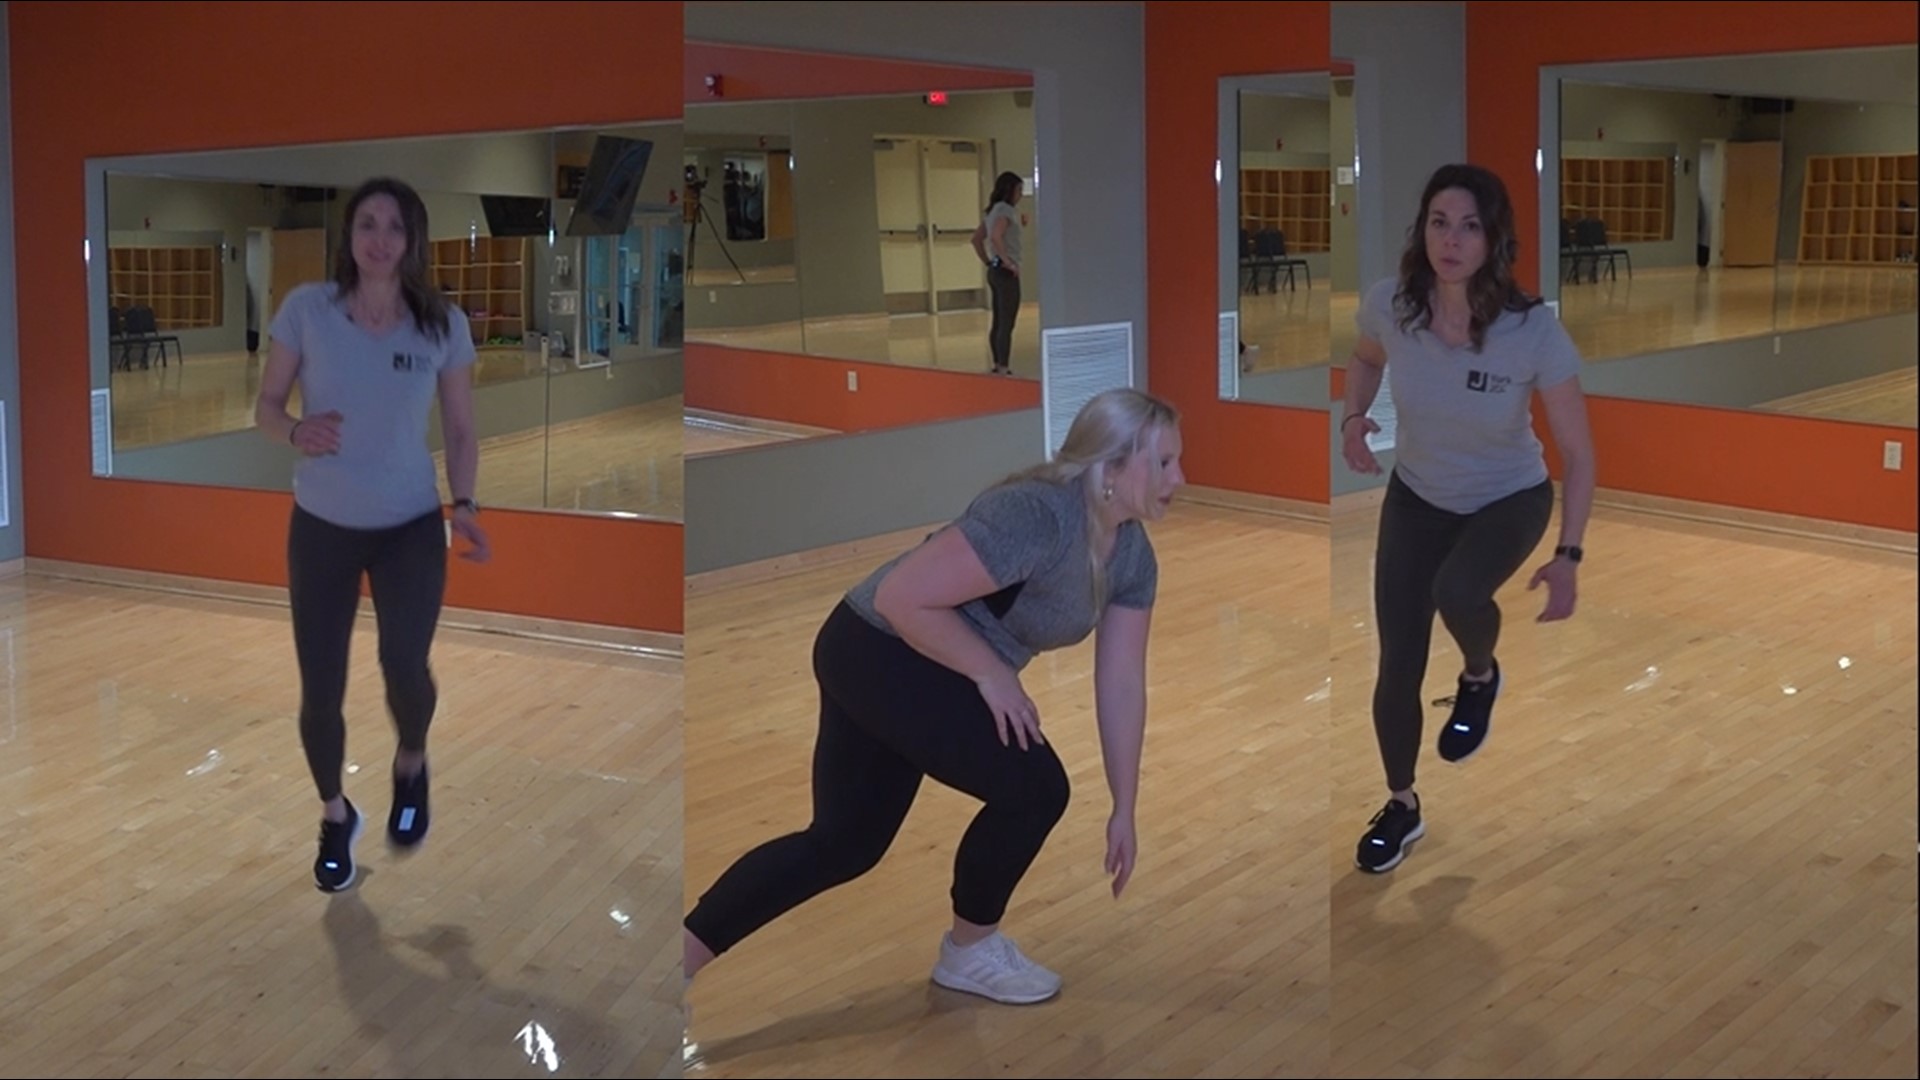 Super Bowl themed exercise moves, FitMinute